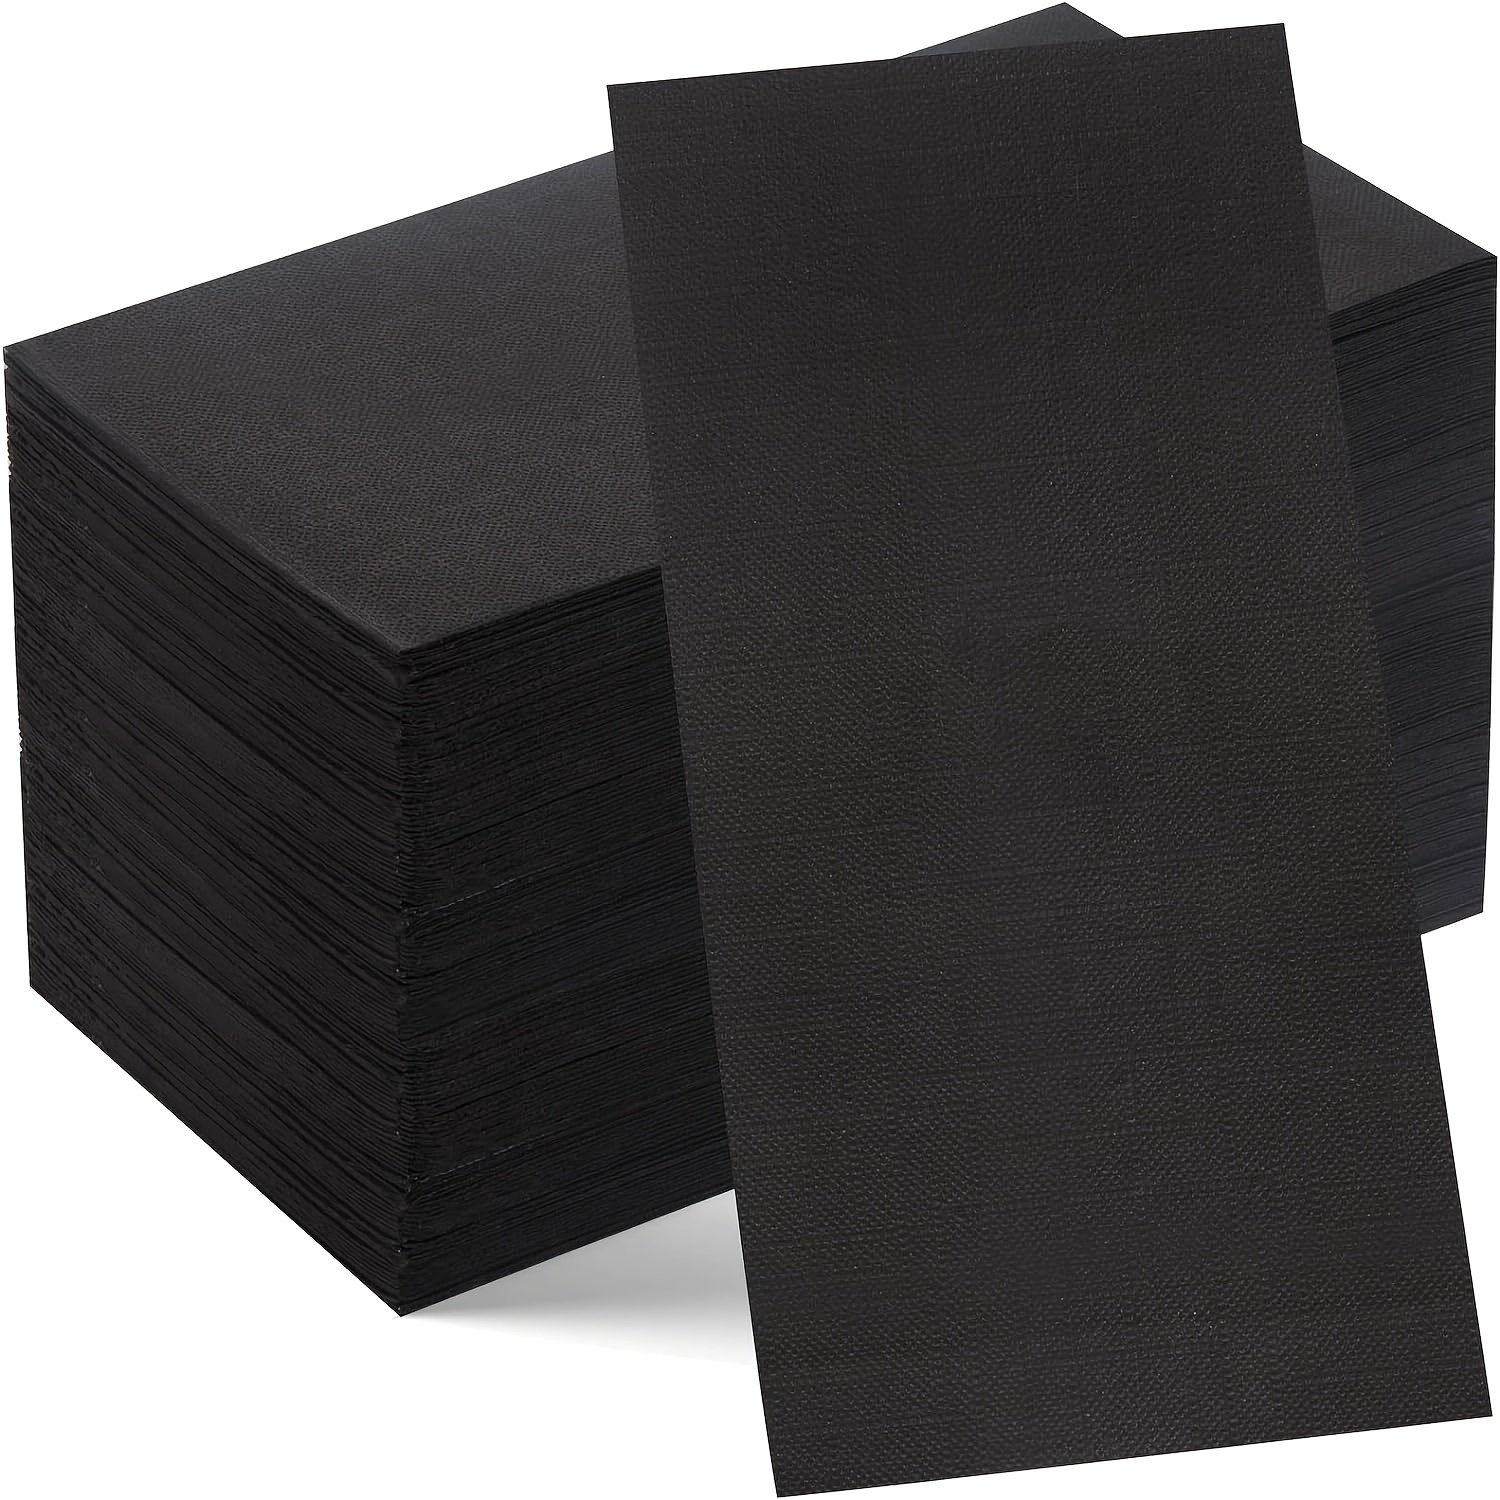 

150pack Black Paper Napkins - 3ply Black Napkins Disposable Premium Quality Soft And Absorbent Black Dinner Napkins For Halloween Party, Wedding, Bathroom Or Any Occasion.